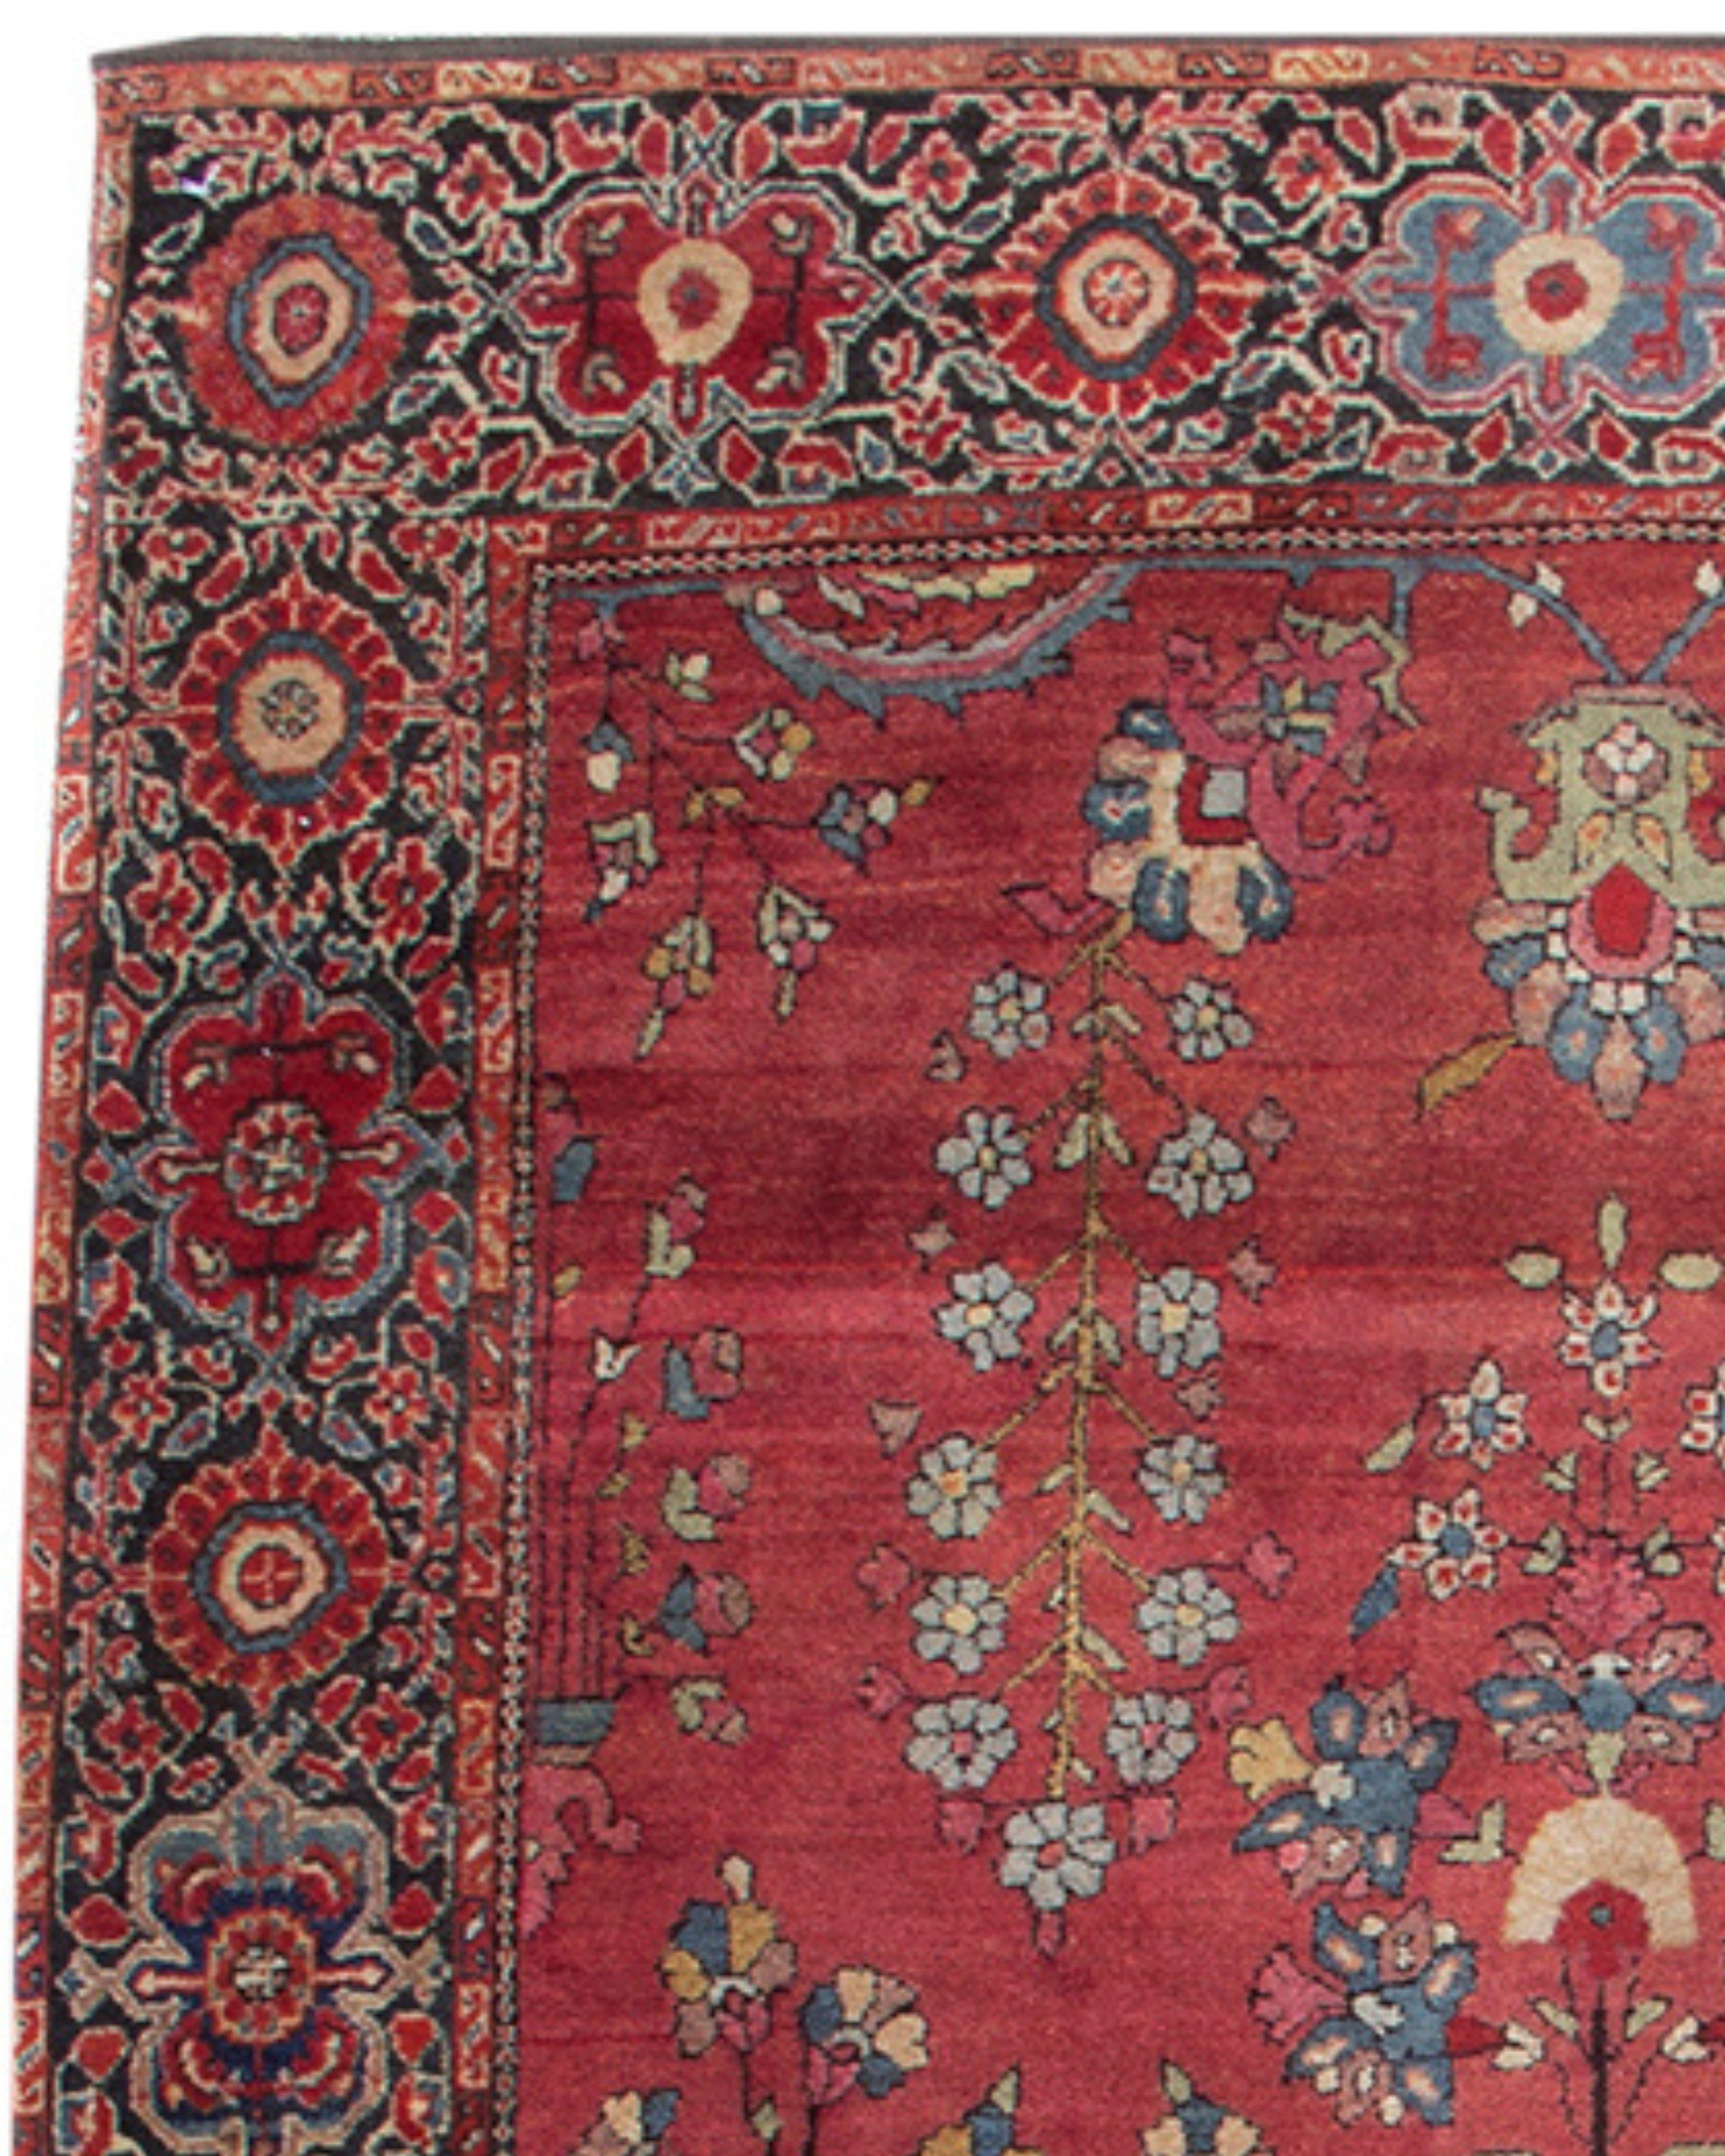 Hand-Knotted Antique Persian Fereghan Sarouk Rug, Early 20th Century For Sale